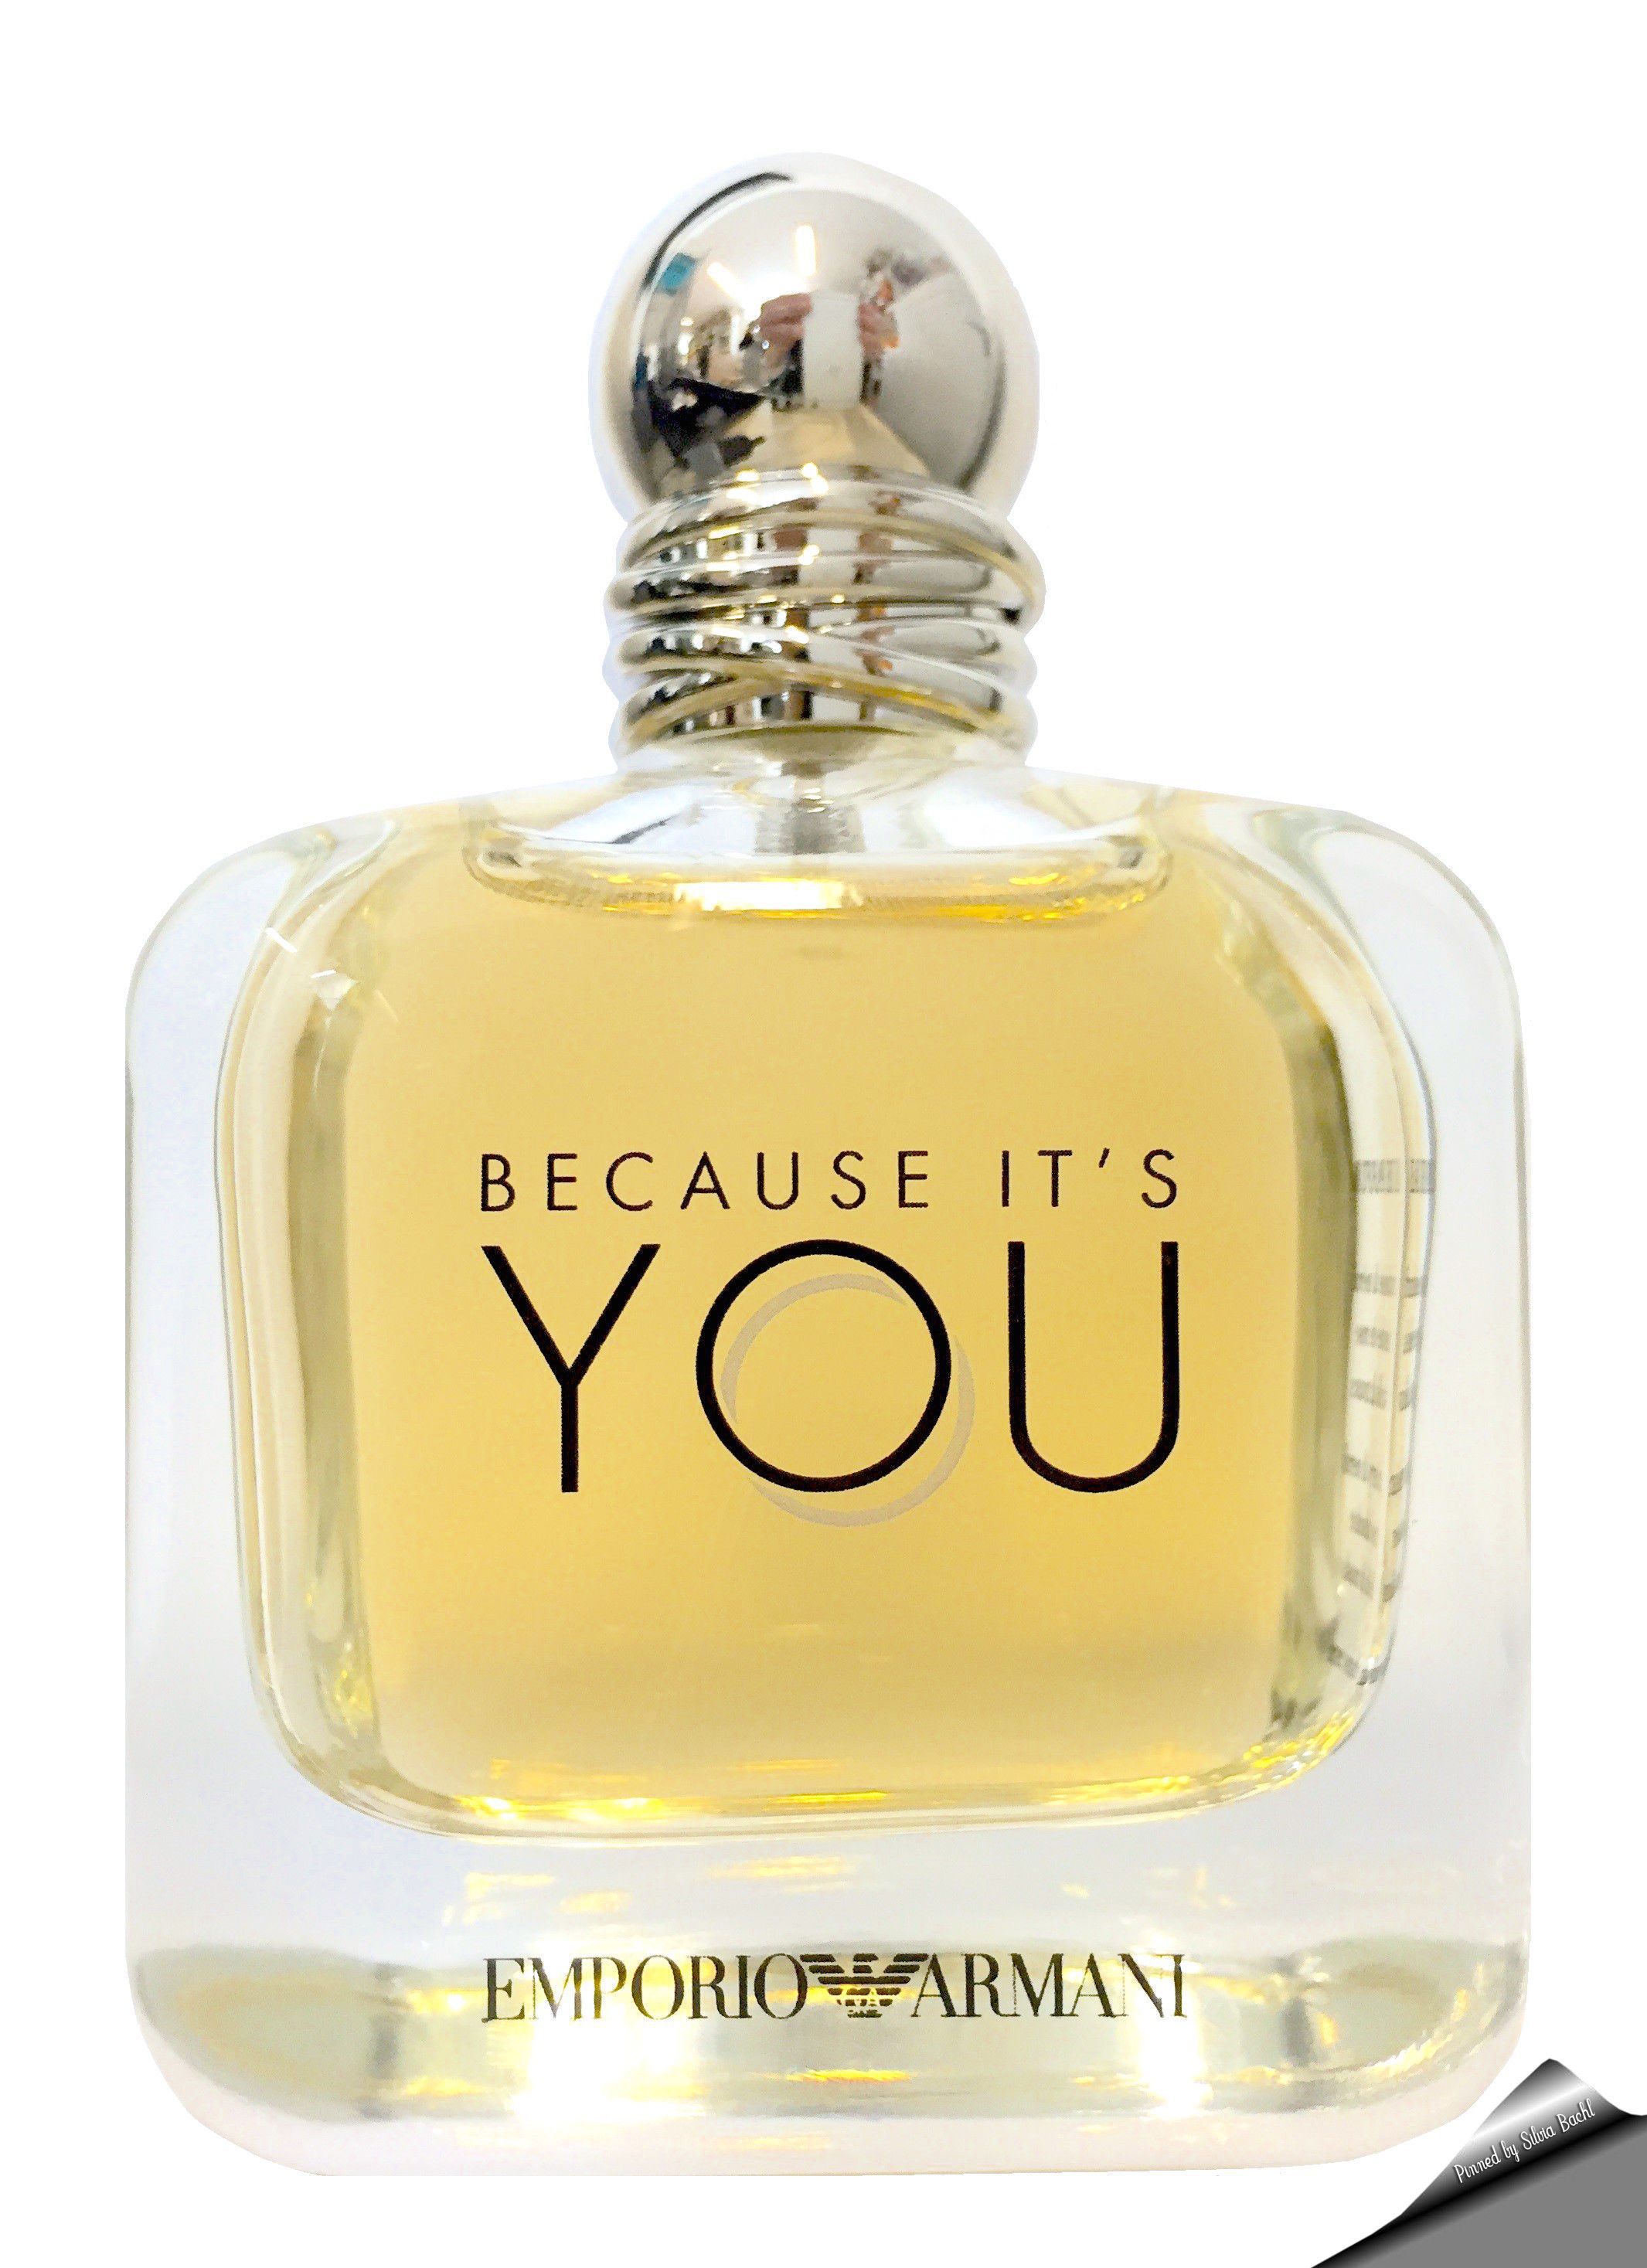 it's because of you perfume